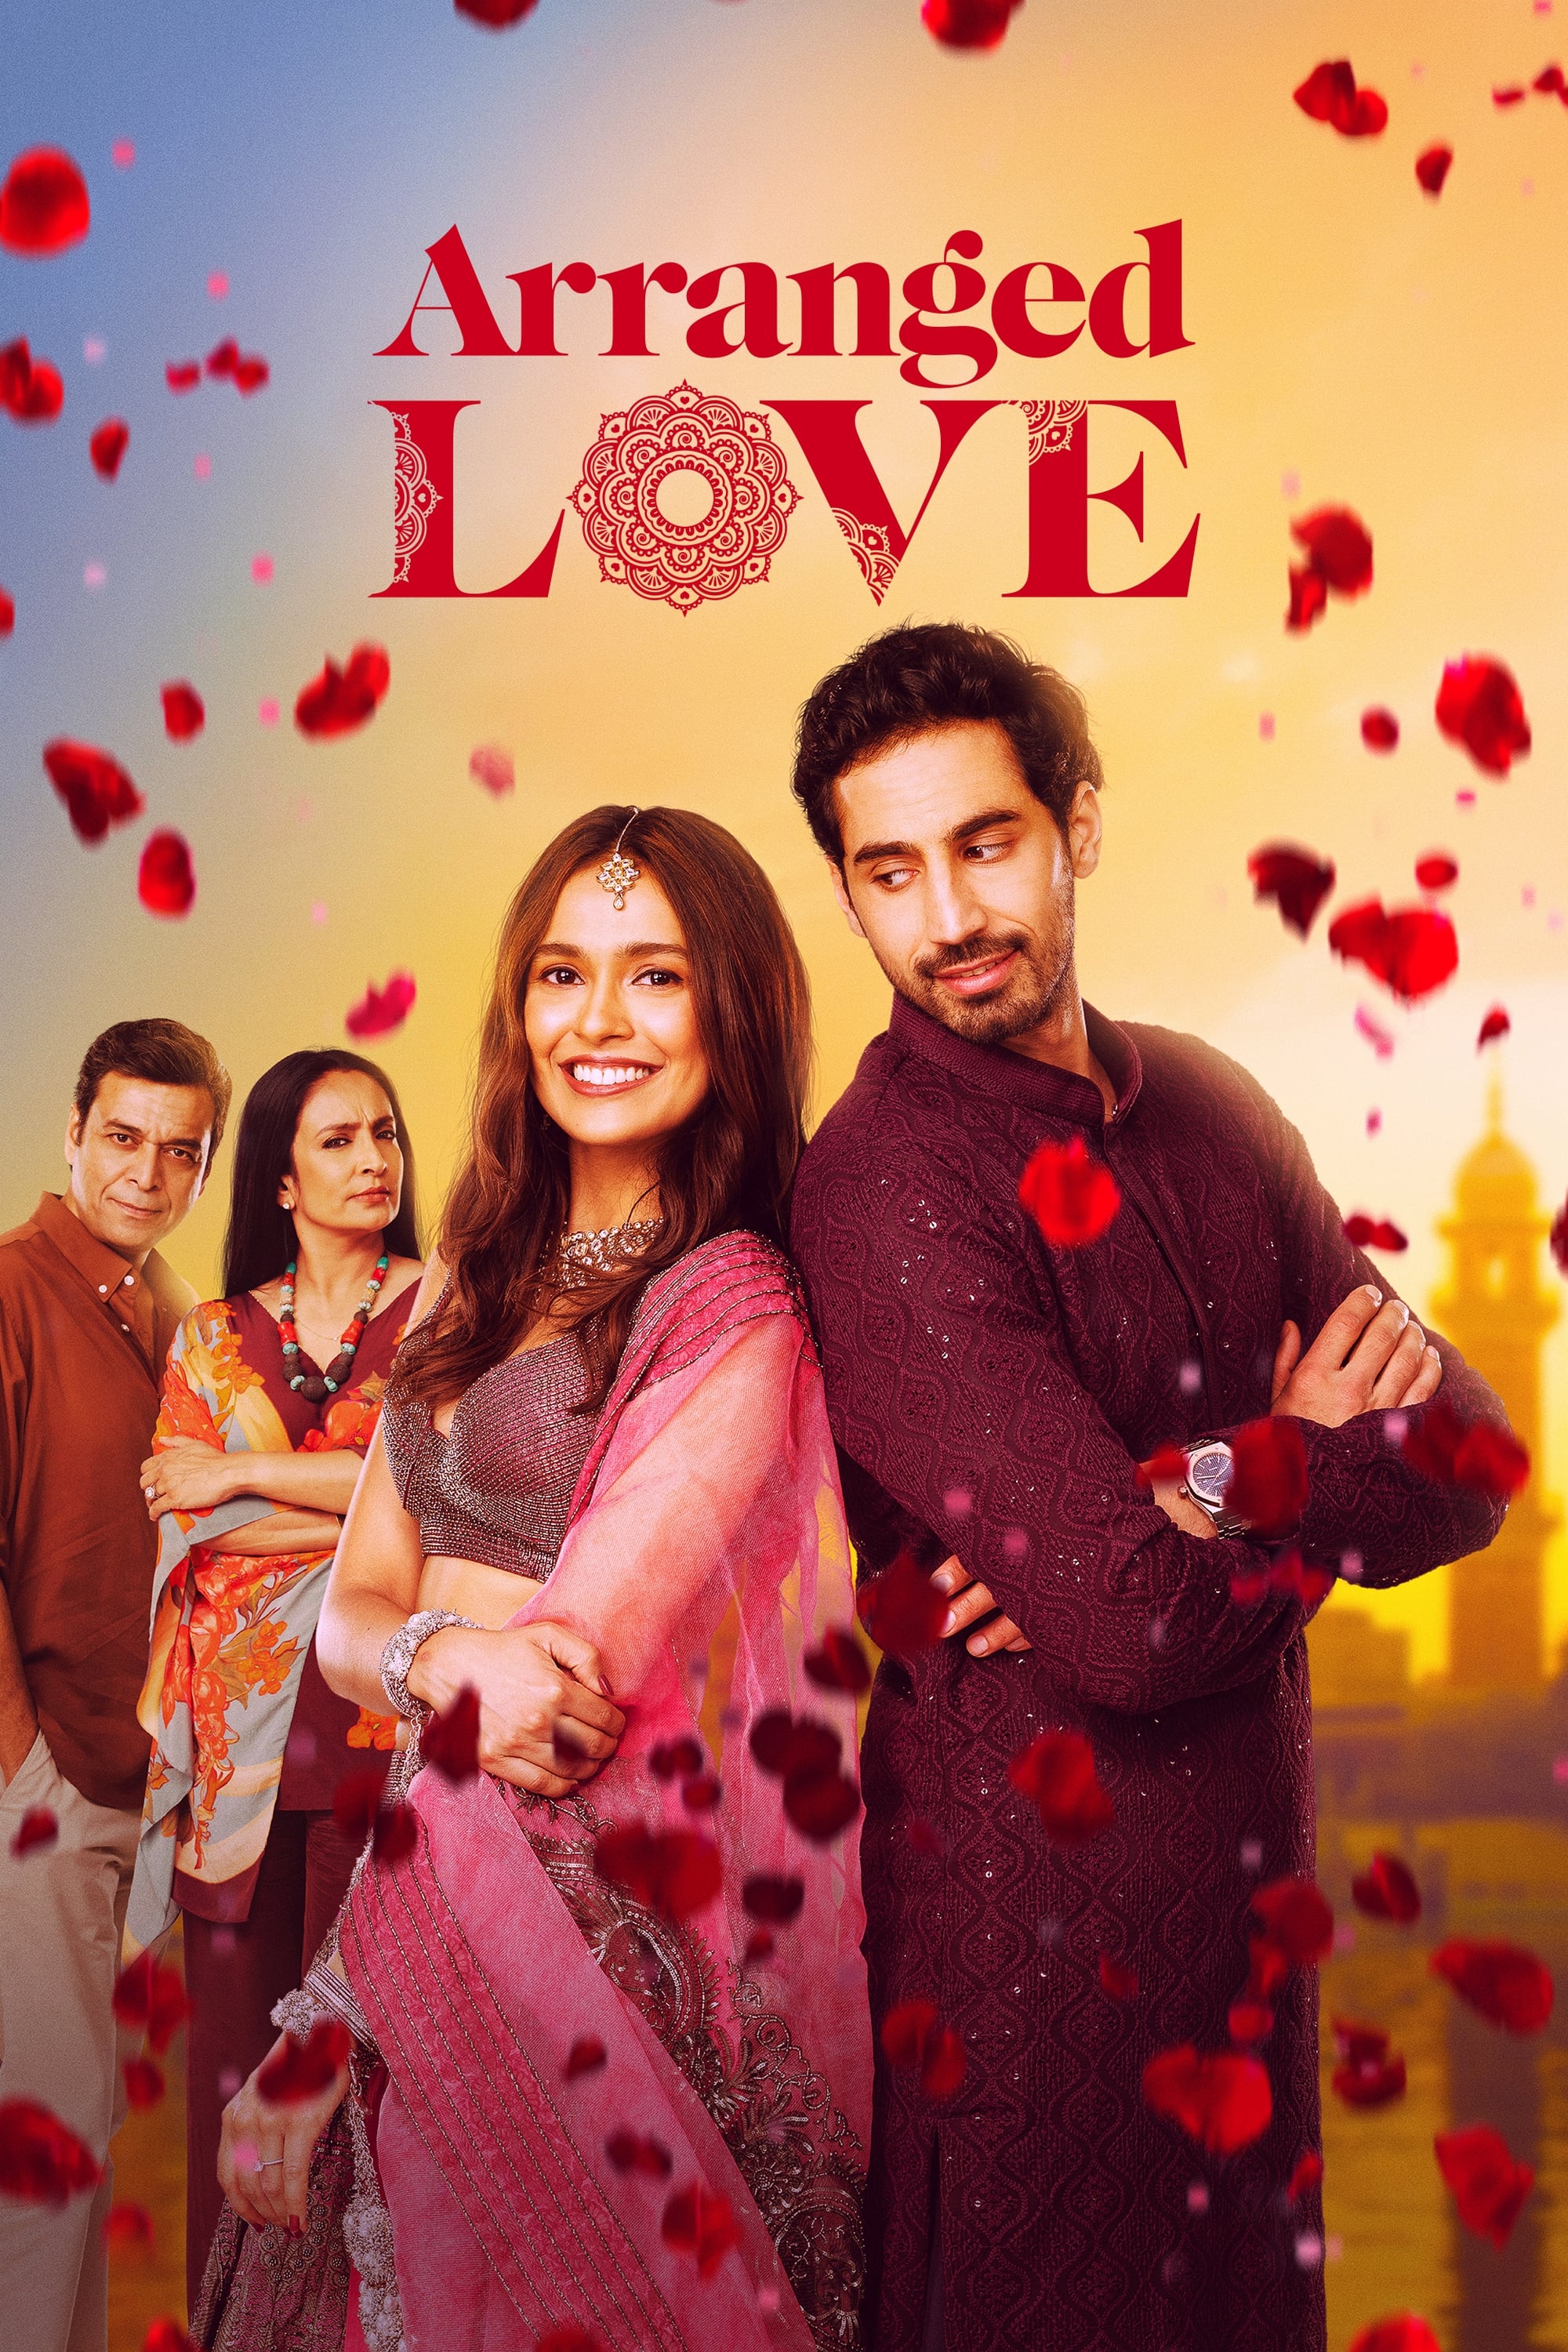 [WATCH 25+] Arranged Love (2023) FULL MOVIE ONLINE FREE ENGLISH/Dub/SUB Comedy STREAMINGS ������ Movie Poster